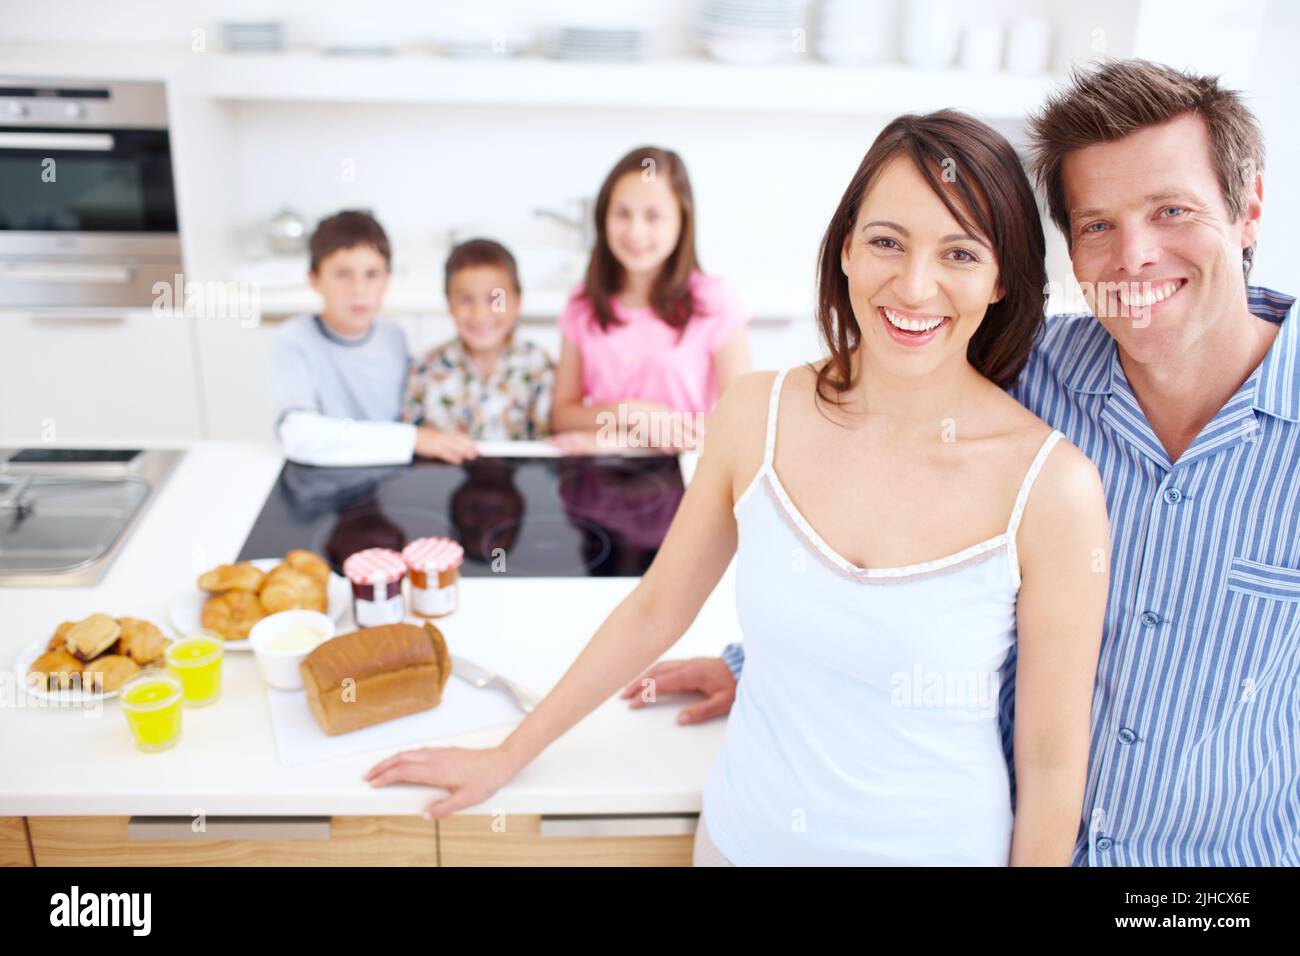 Keeping our family healthy, body and mind. A blissful couple standing alongside a wholesome breakfast with their children blurred in the background. Stock Photo